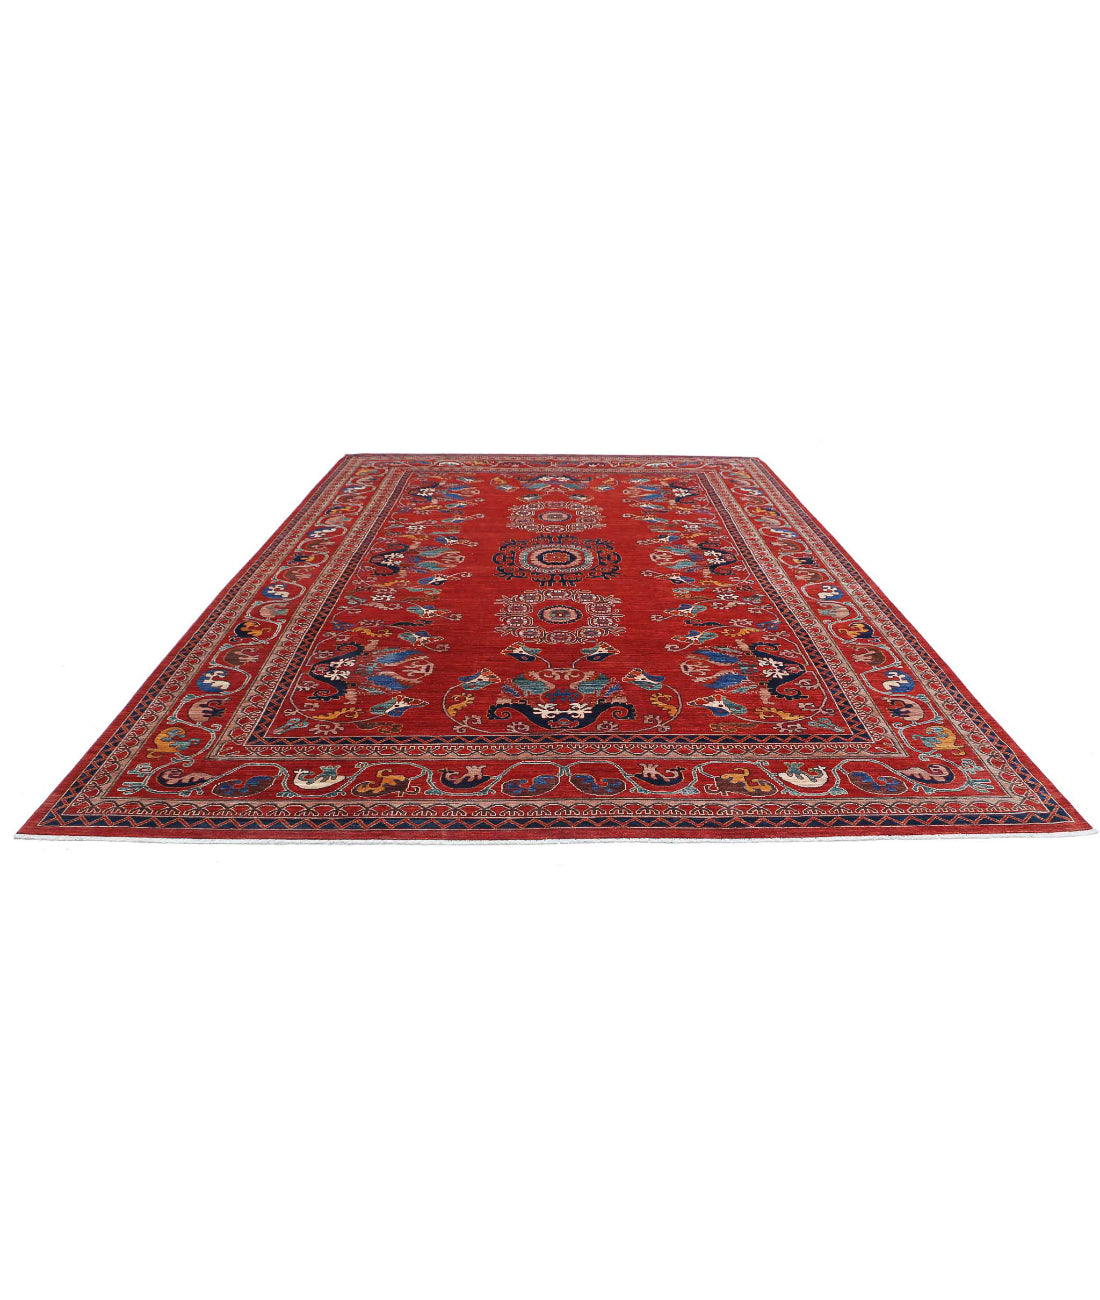 Hand Knotted Nomadic Caucasian Humna Wool Rug - 10'2'' x 13'7'' 10'2'' x 13'7'' (305 X 408) / Red / Blue